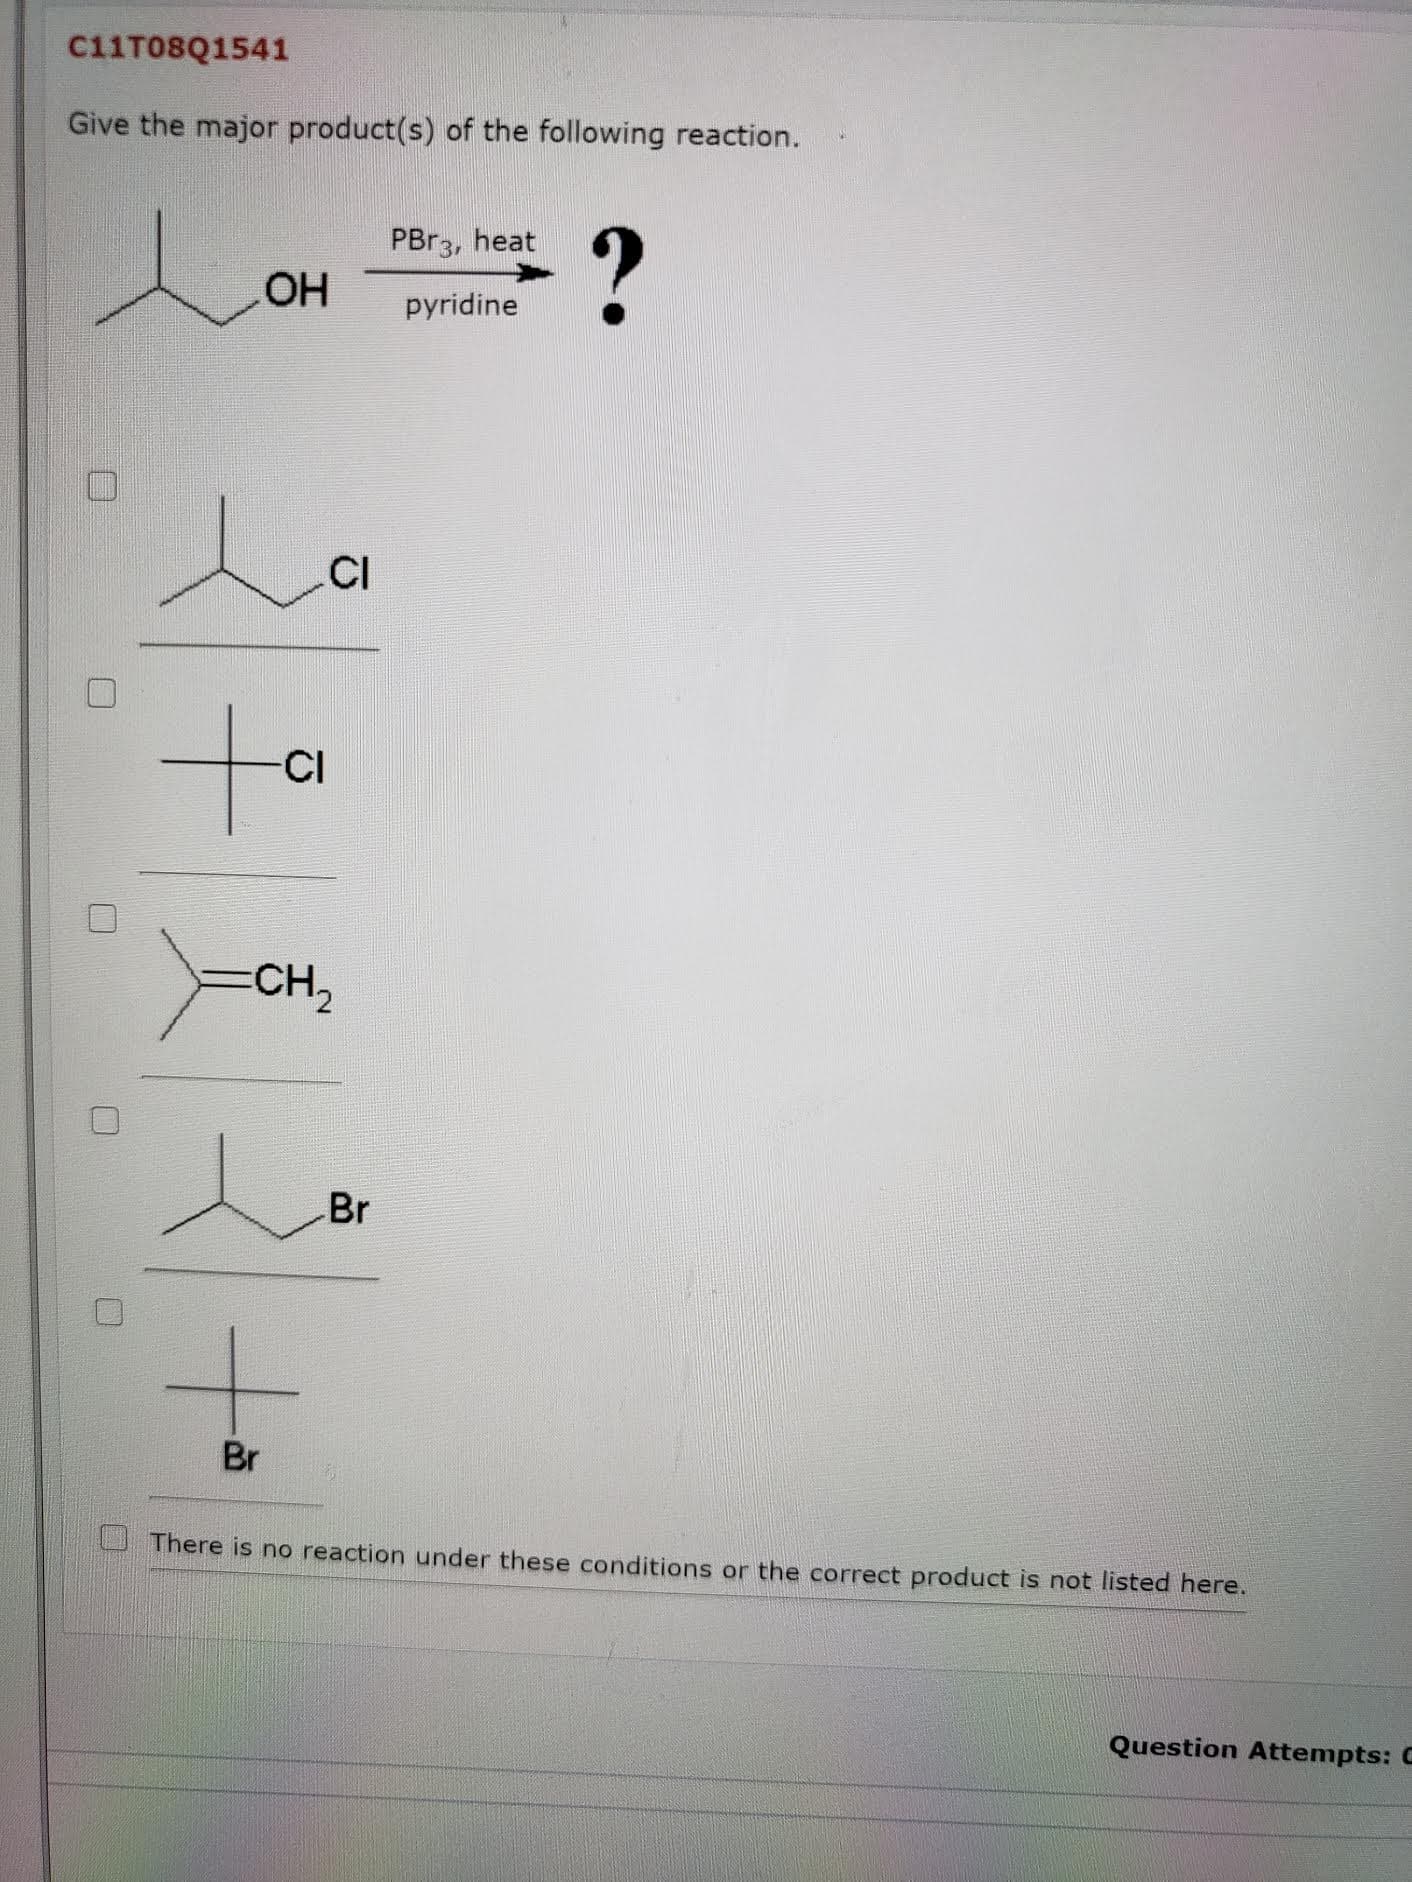 Give the major product(s) of the following reaction.
PBR3, heat
OH
pyridine
CI
to
-CI
ECH,
Br
Br
There is no reaction under these conditions or the correct product is not listed here.
